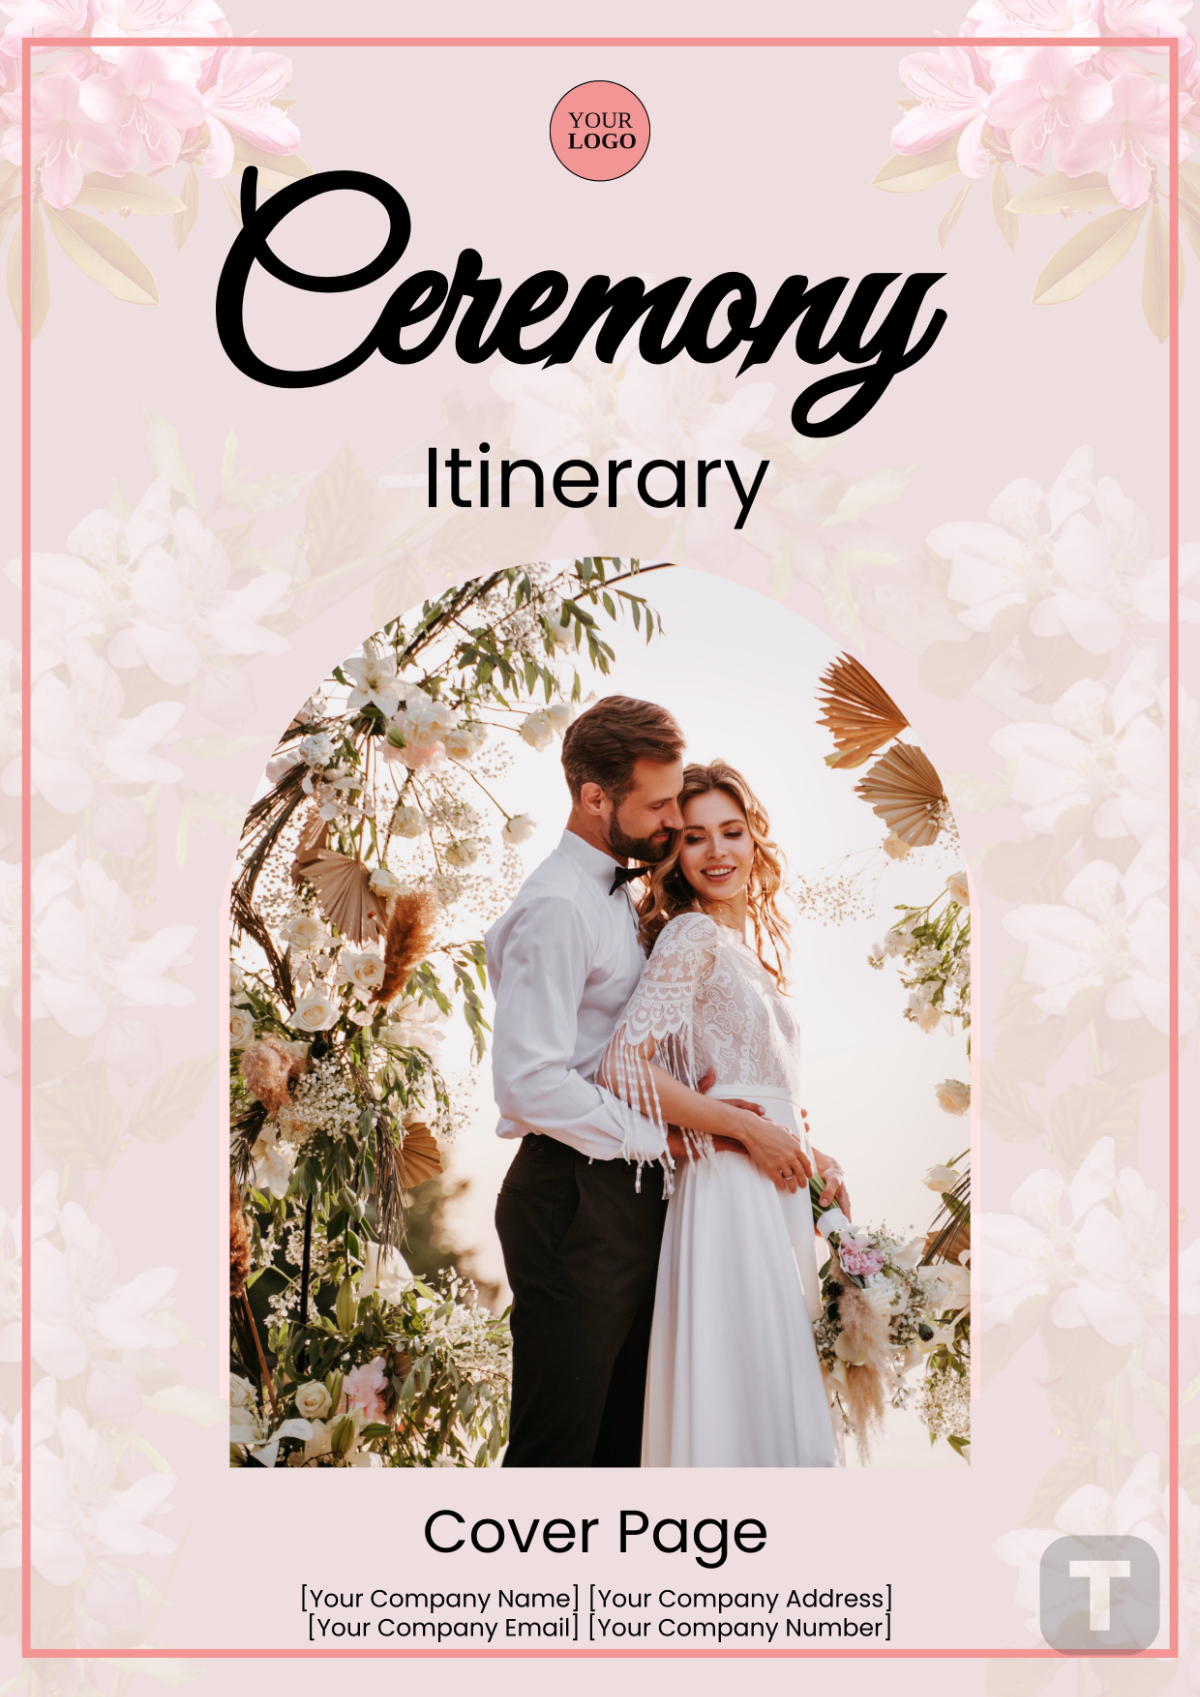 Ceremony Itinerary Cover Page